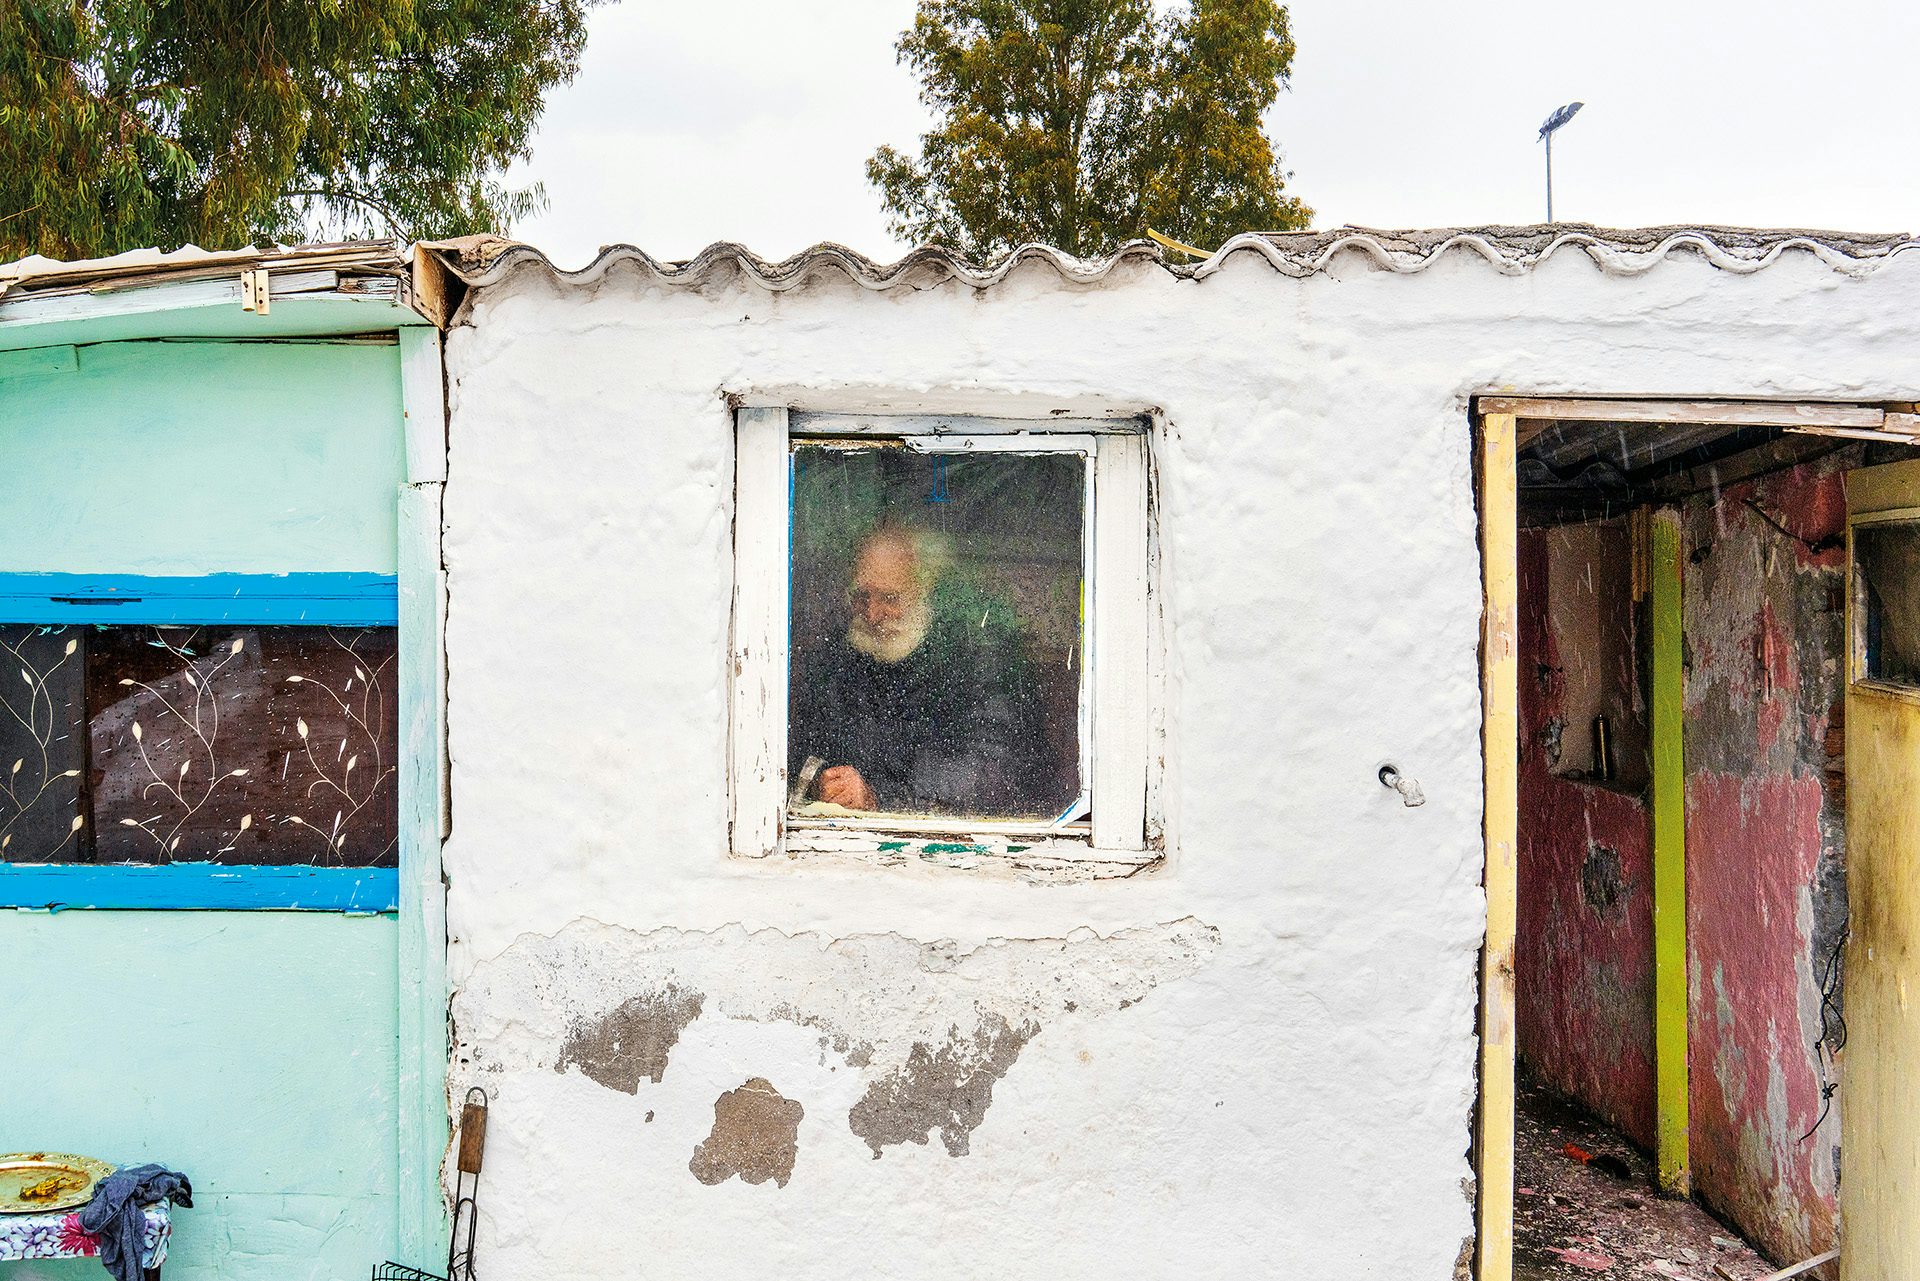 Image by Niko J. Kallianiotis shows a person inside a small white building framed by the window